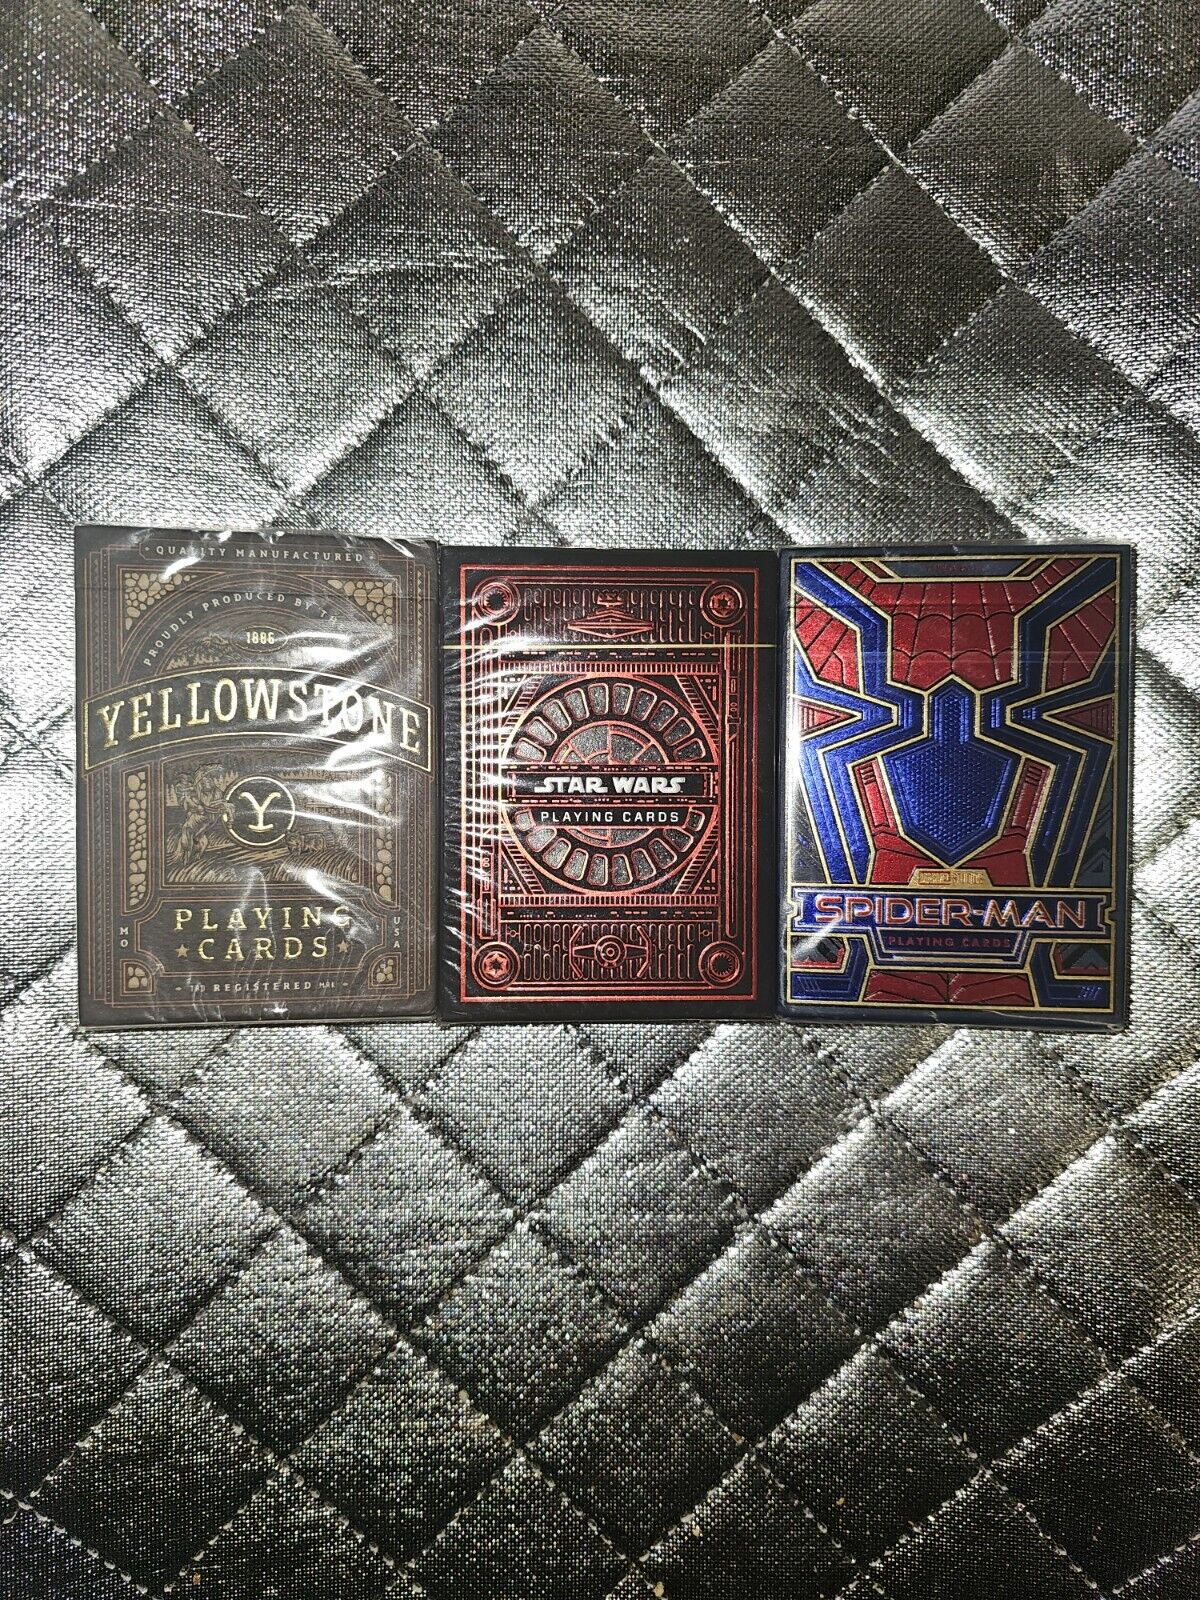 (3) Theory11 Yellowstone| Spider-Man | Star Wars Playing Cards